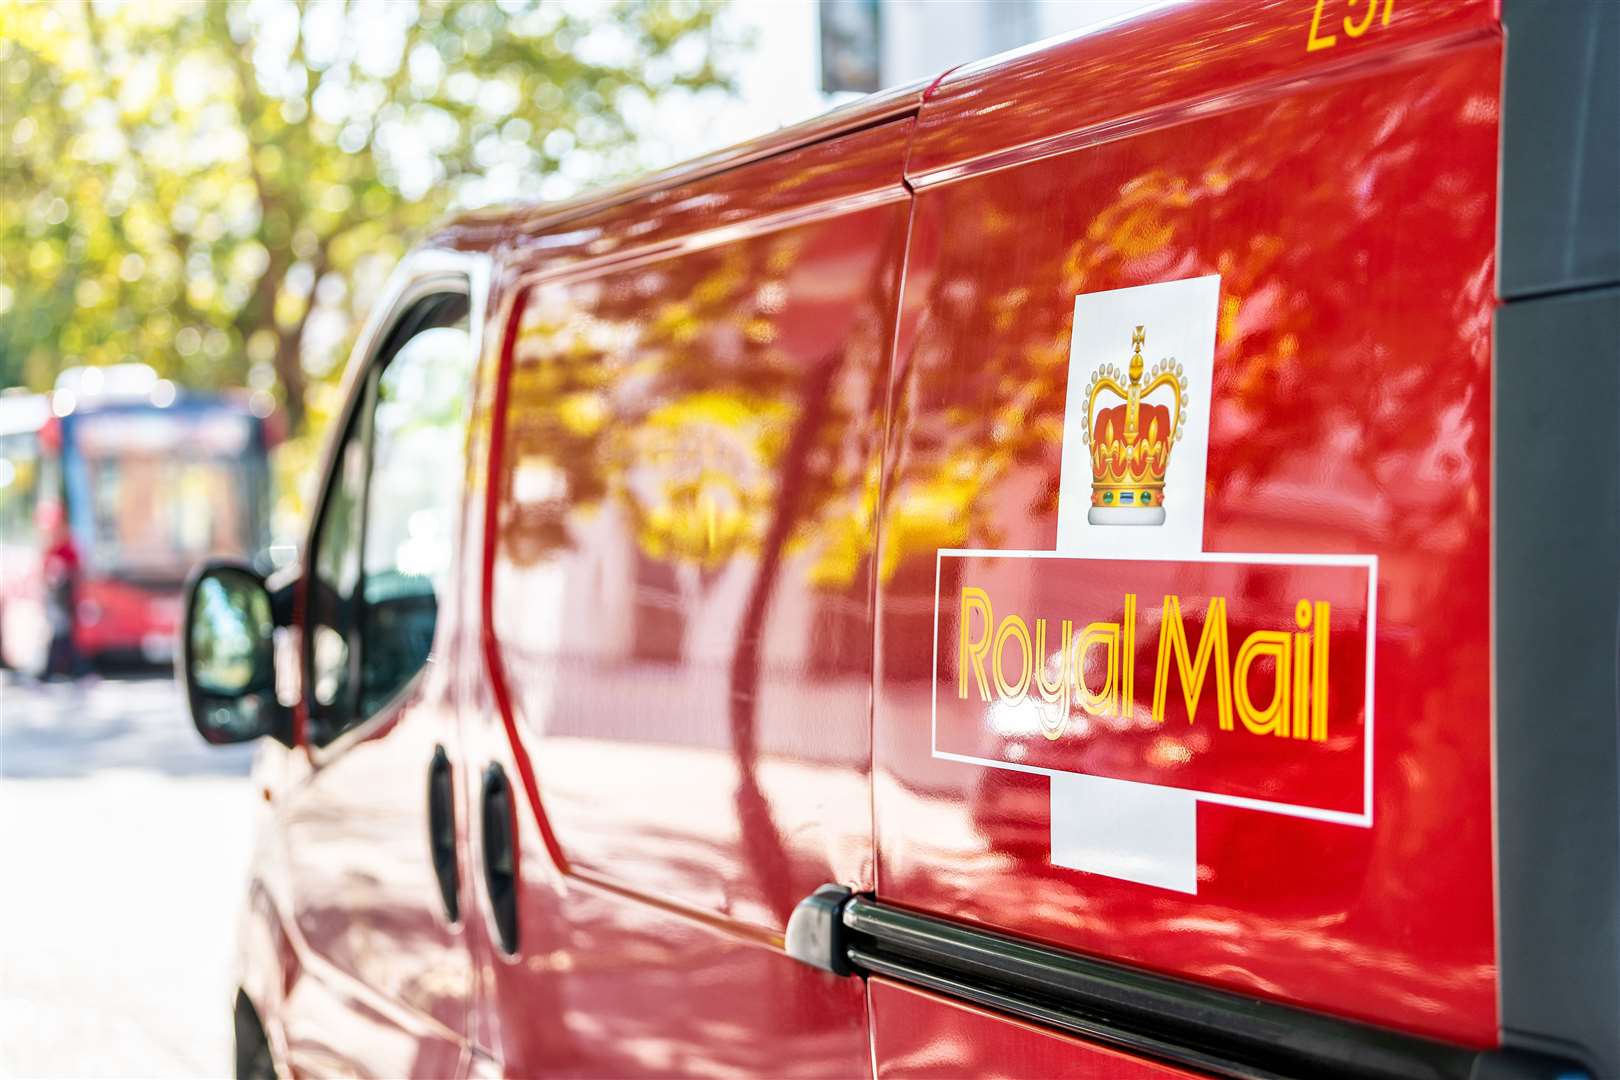 Royal Mail has responsibility for post boxes.